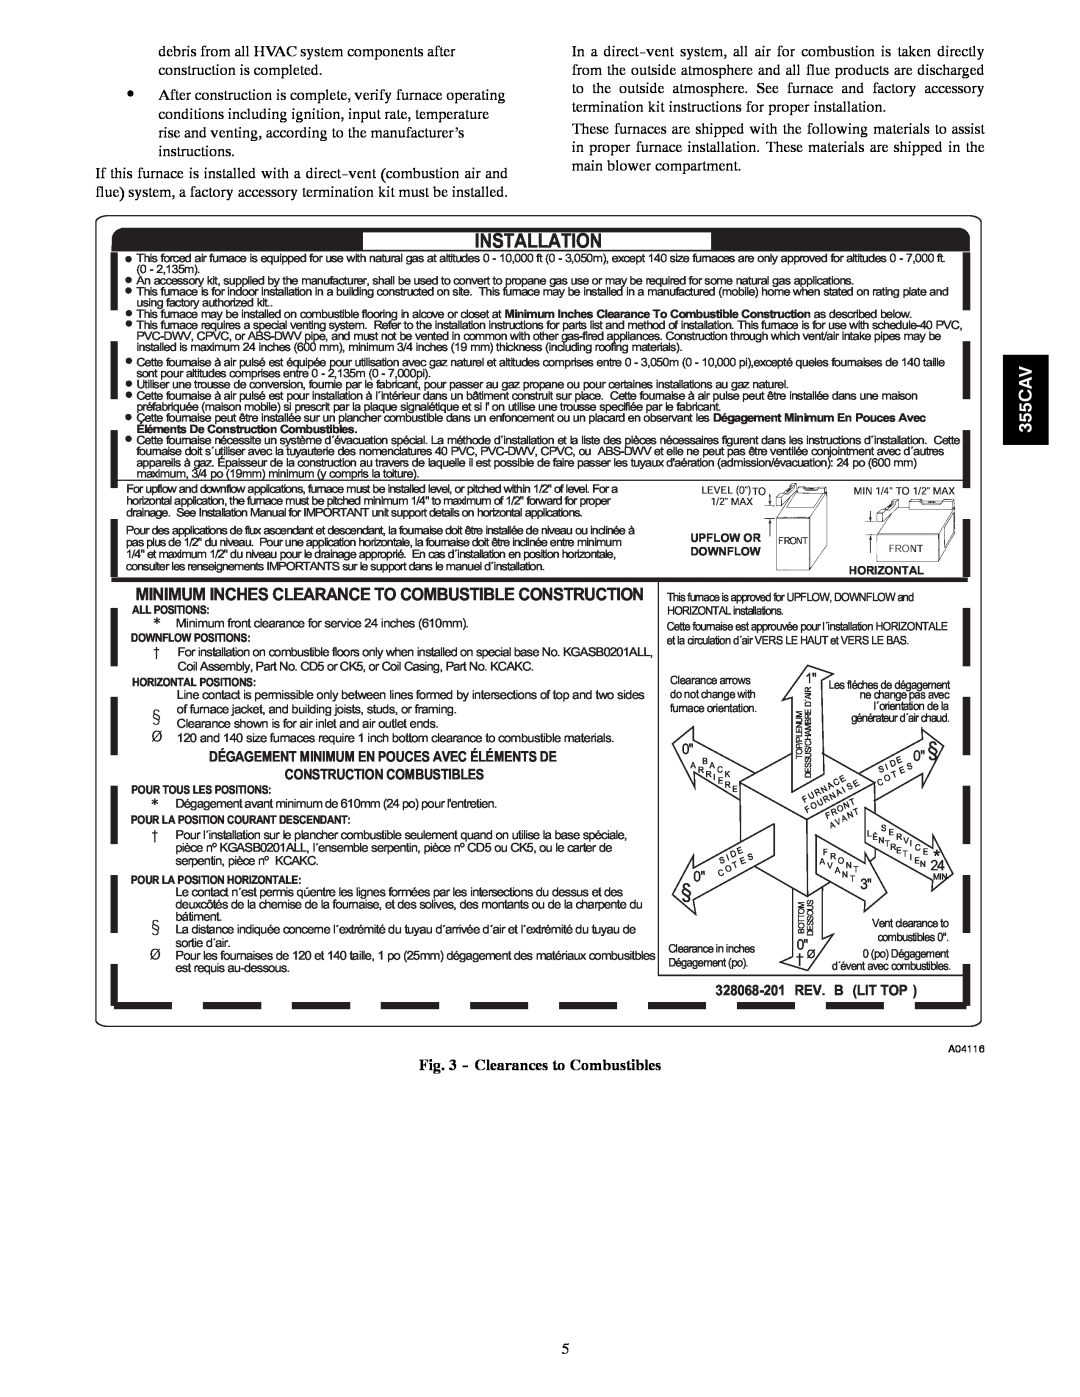 Bryant 355CAV installation instructions Clearances to Combustibles, Installation 